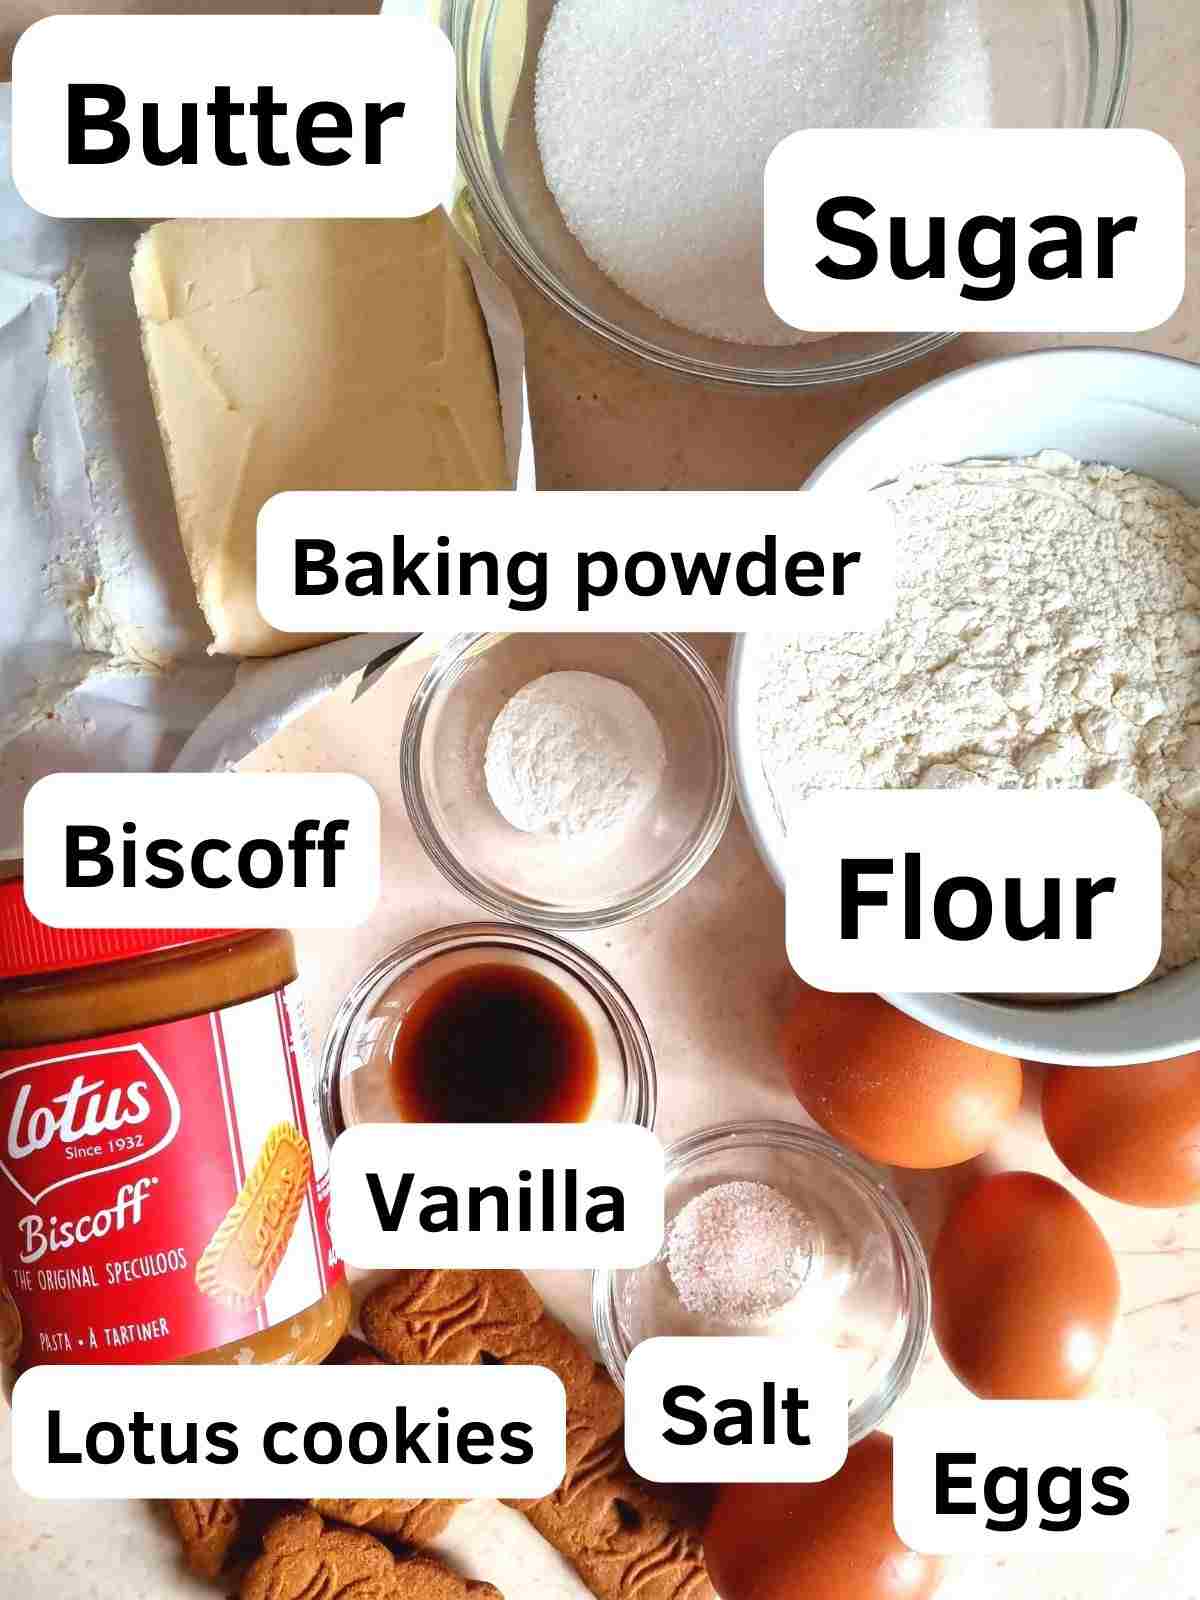 Ingredients for the cake Sponges.